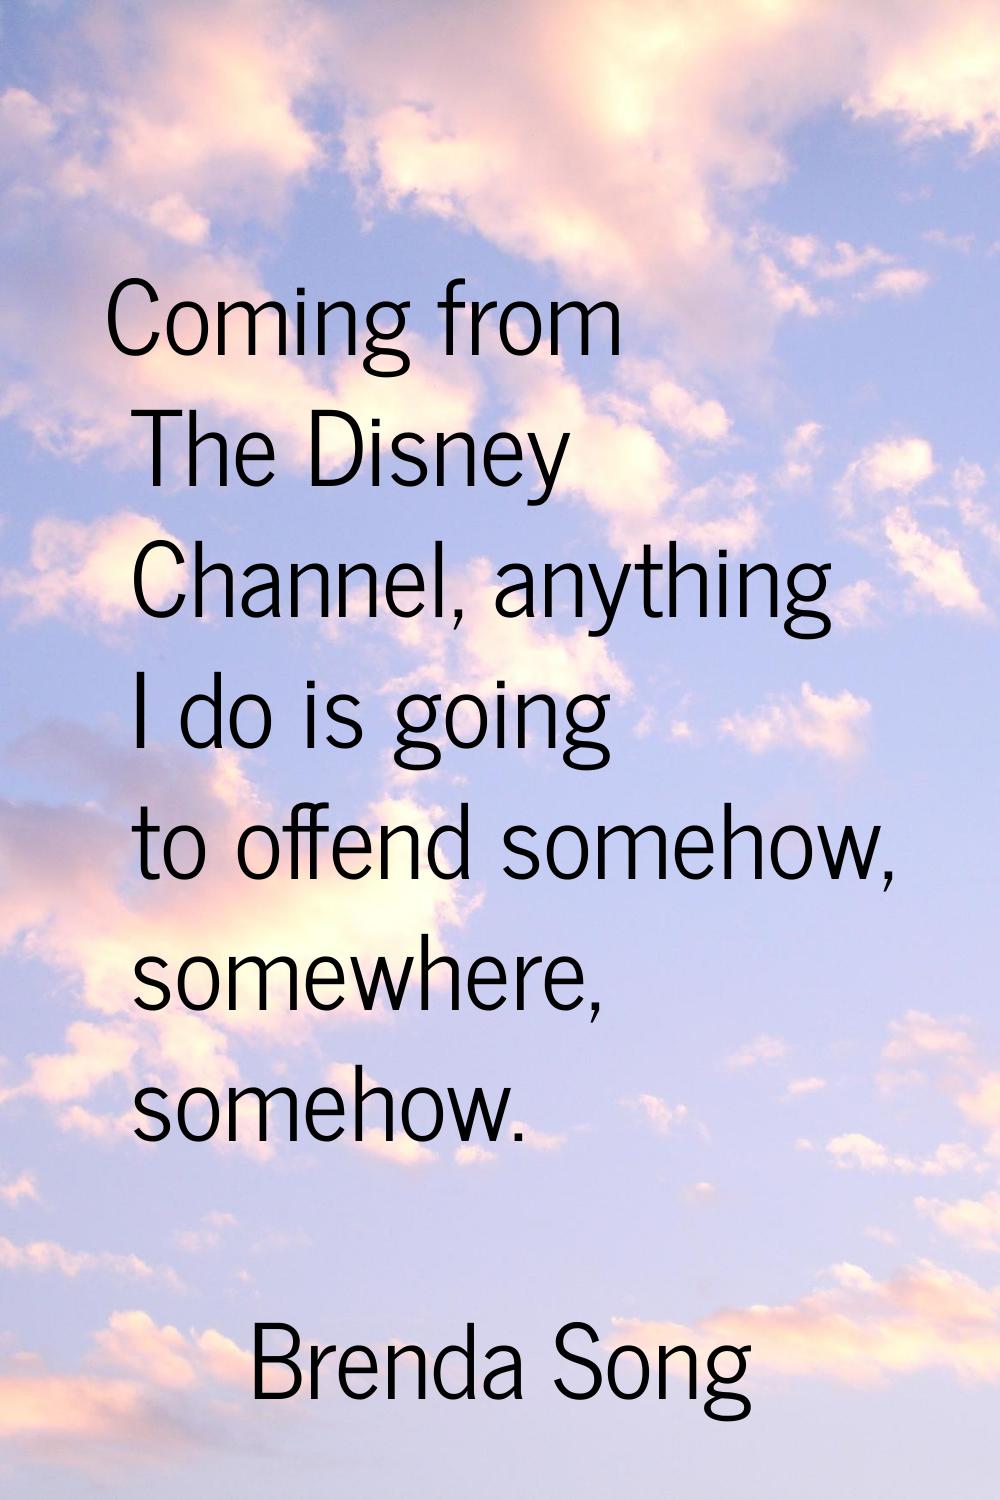 Coming from The Disney Channel, anything I do is going to offend somehow, somewhere, somehow.